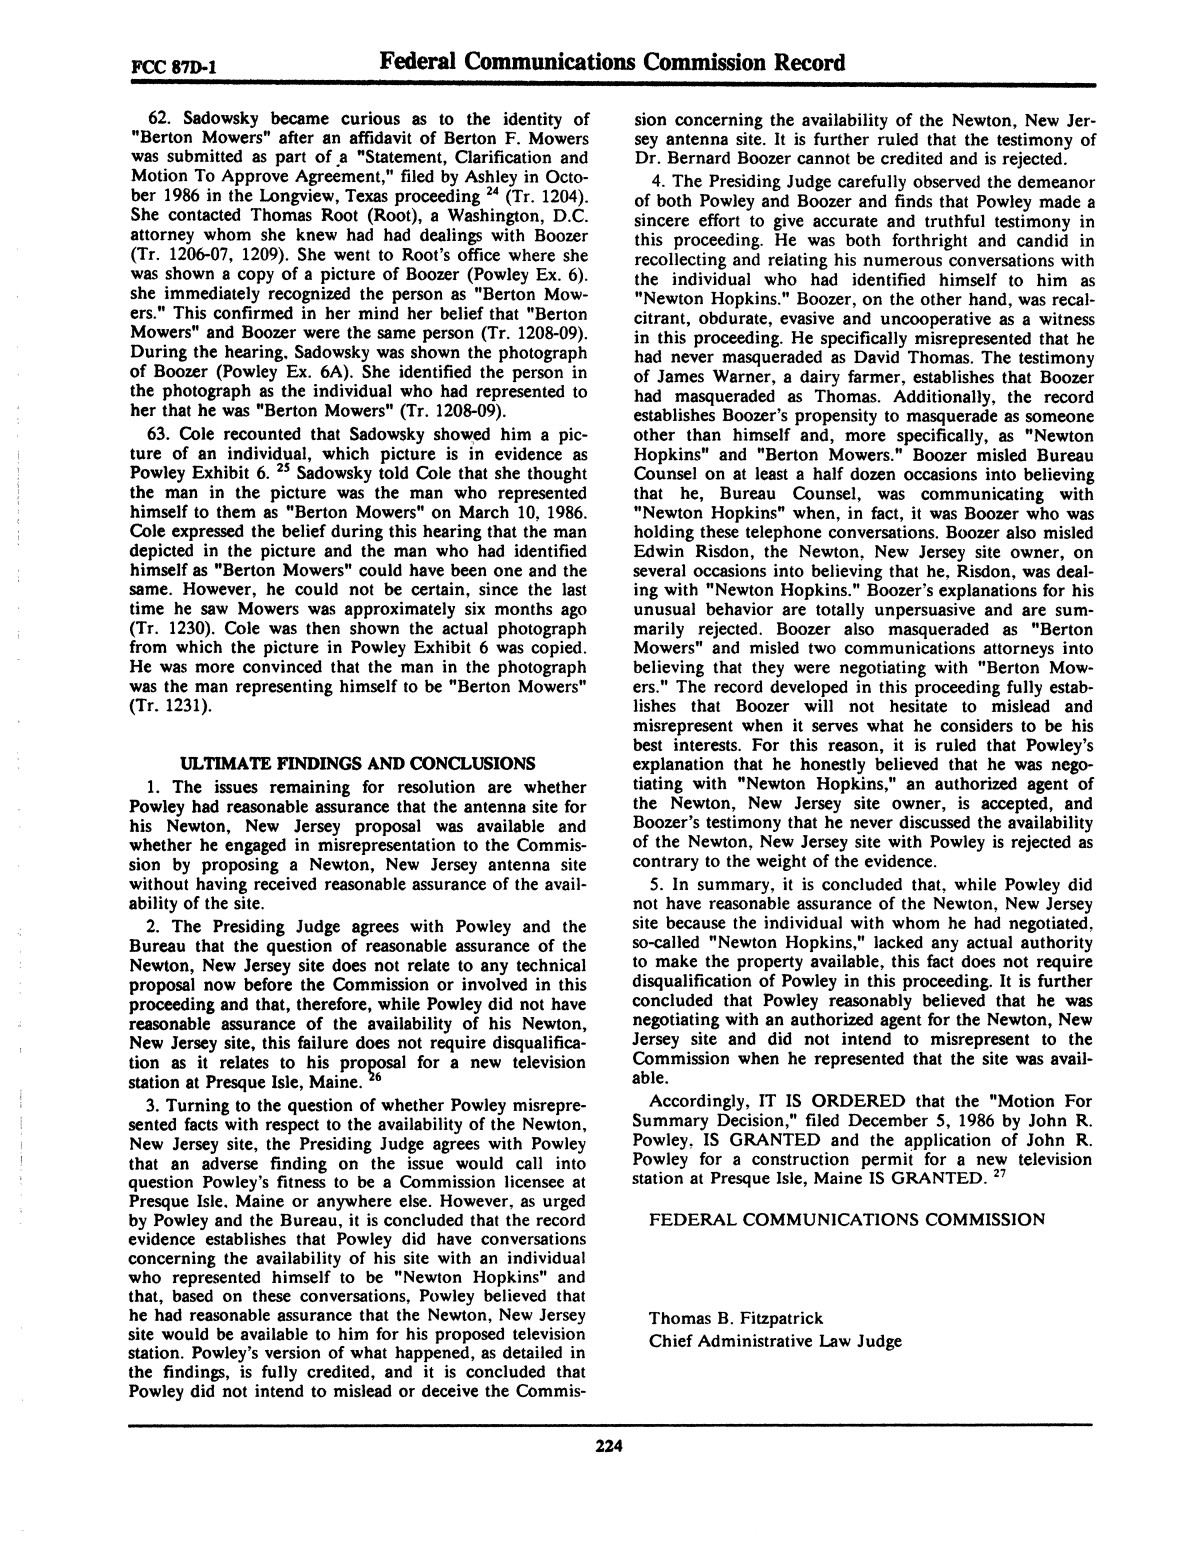 FCC Record, Volume 2, No. 1, Pages 1 to 409, January 5 - January 16, 1987
                                                
                                                    224
                                                